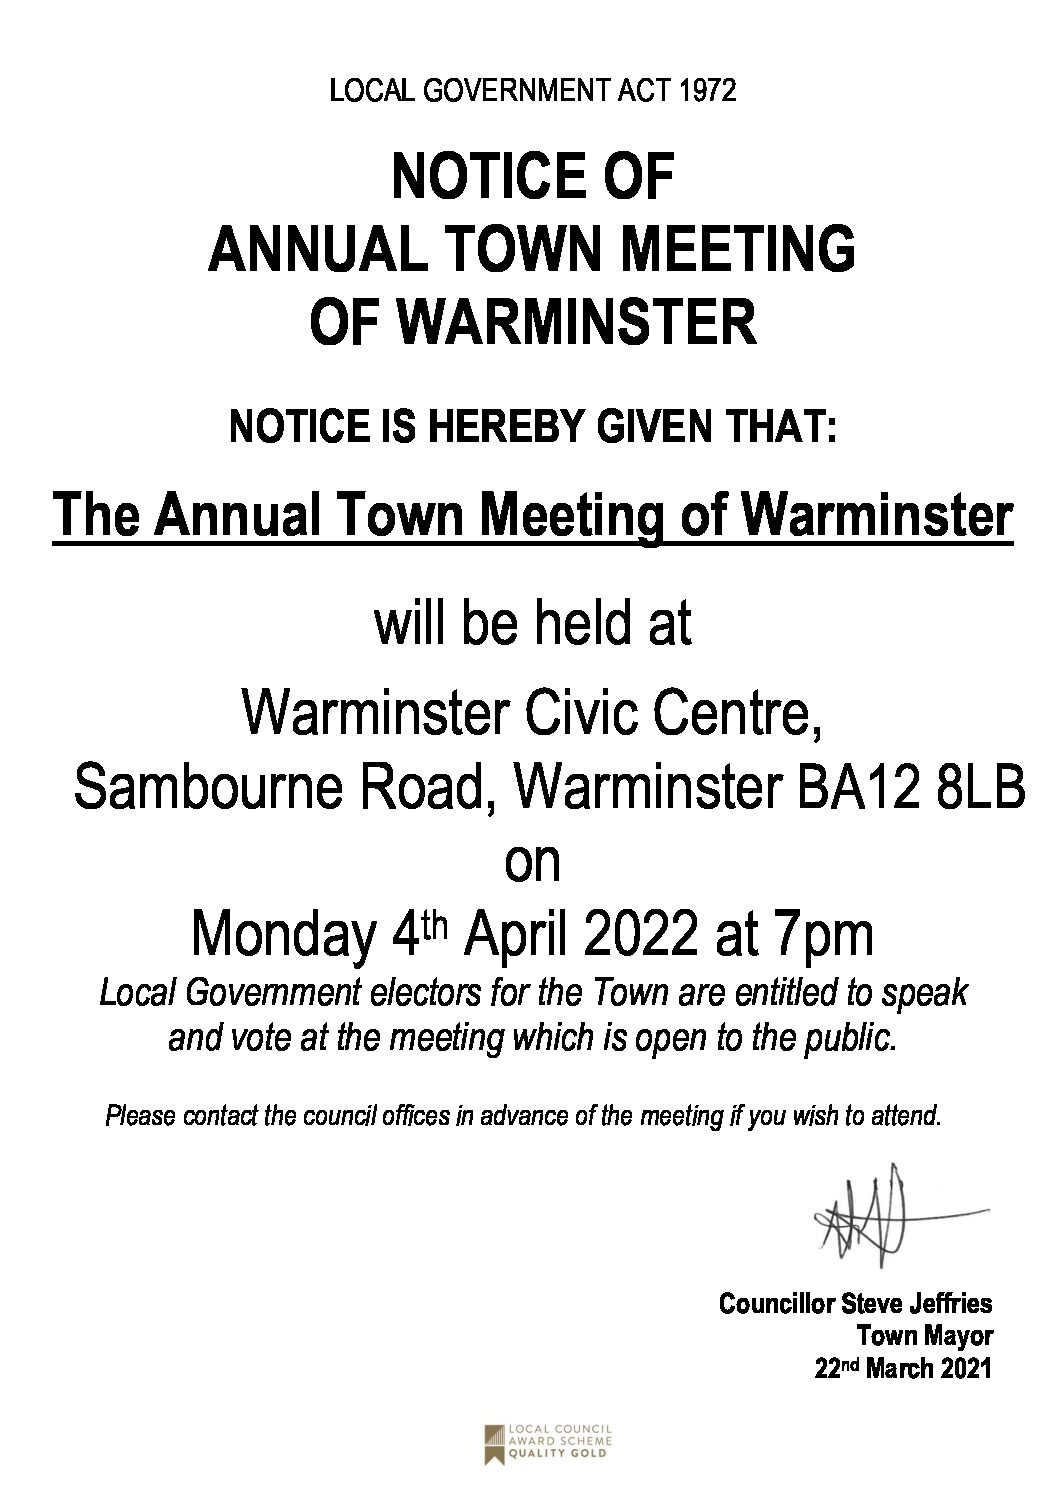 Notice of Annual Town Meeting of Warminster